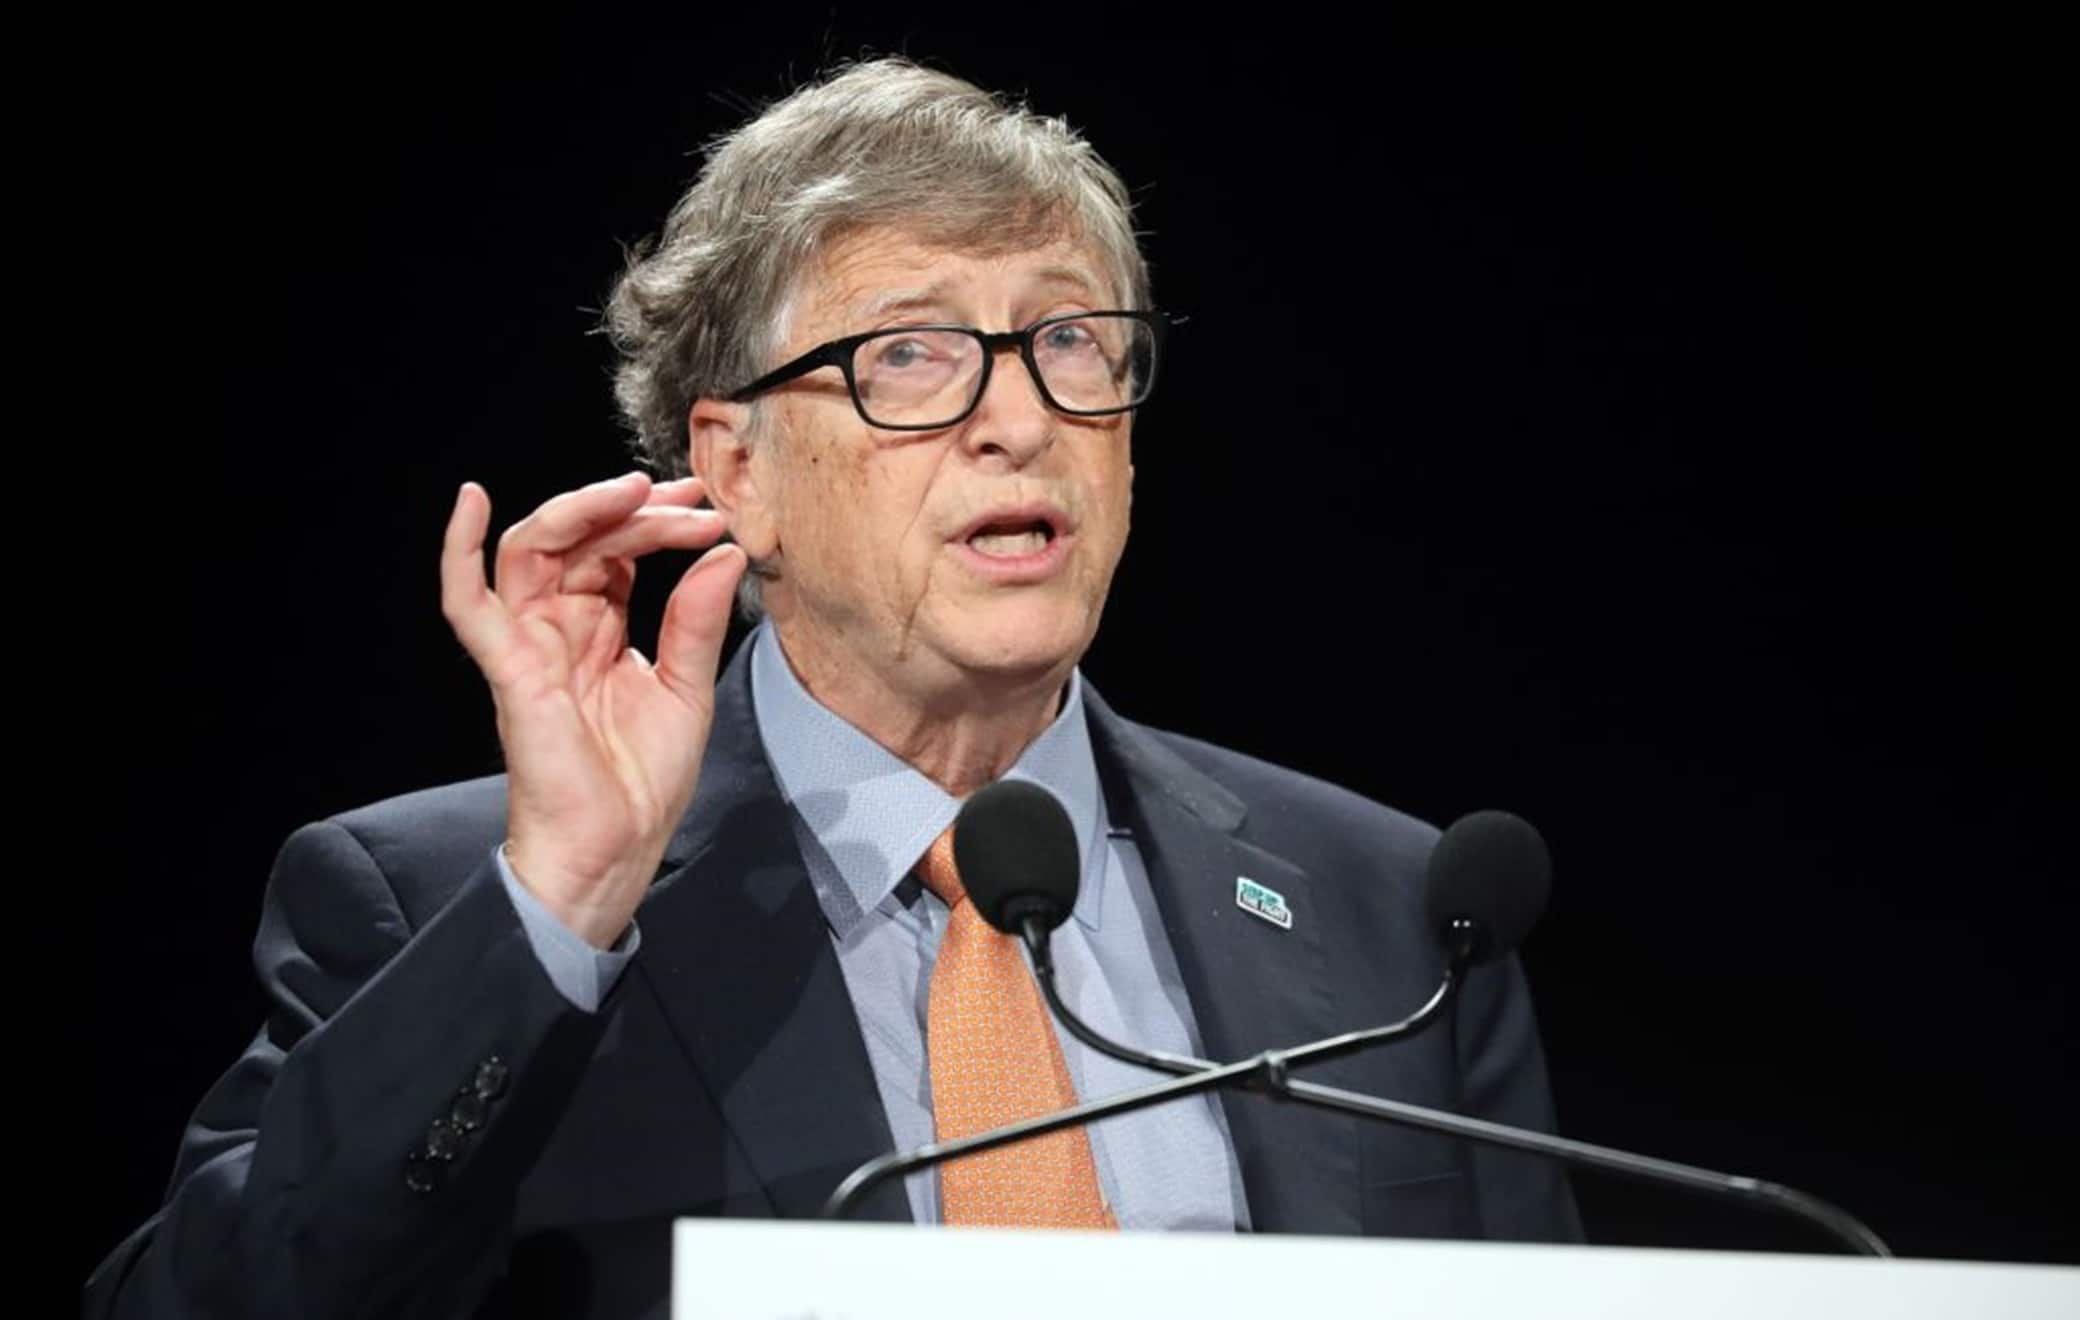 Microsoft founder, Co-Chairman of the Bill & Melinda Gates Foundation, Bill Gates delivers a speech during the conference of Global Fund to Fight HIV, Tuberculosis and Malaria on october 10, 2019, in Lyon, central eastern France. - The Global Fund to Fight AIDS, Tuberculosis and Malaria opened a drive to raise $14 billion to fight a global epidemics but face an uphill battle in the face of donor fatigue. (Photo by Ludovic MARIN / AFP) (Photo by LUDOVIC MARIN/AFP via Getty Images)